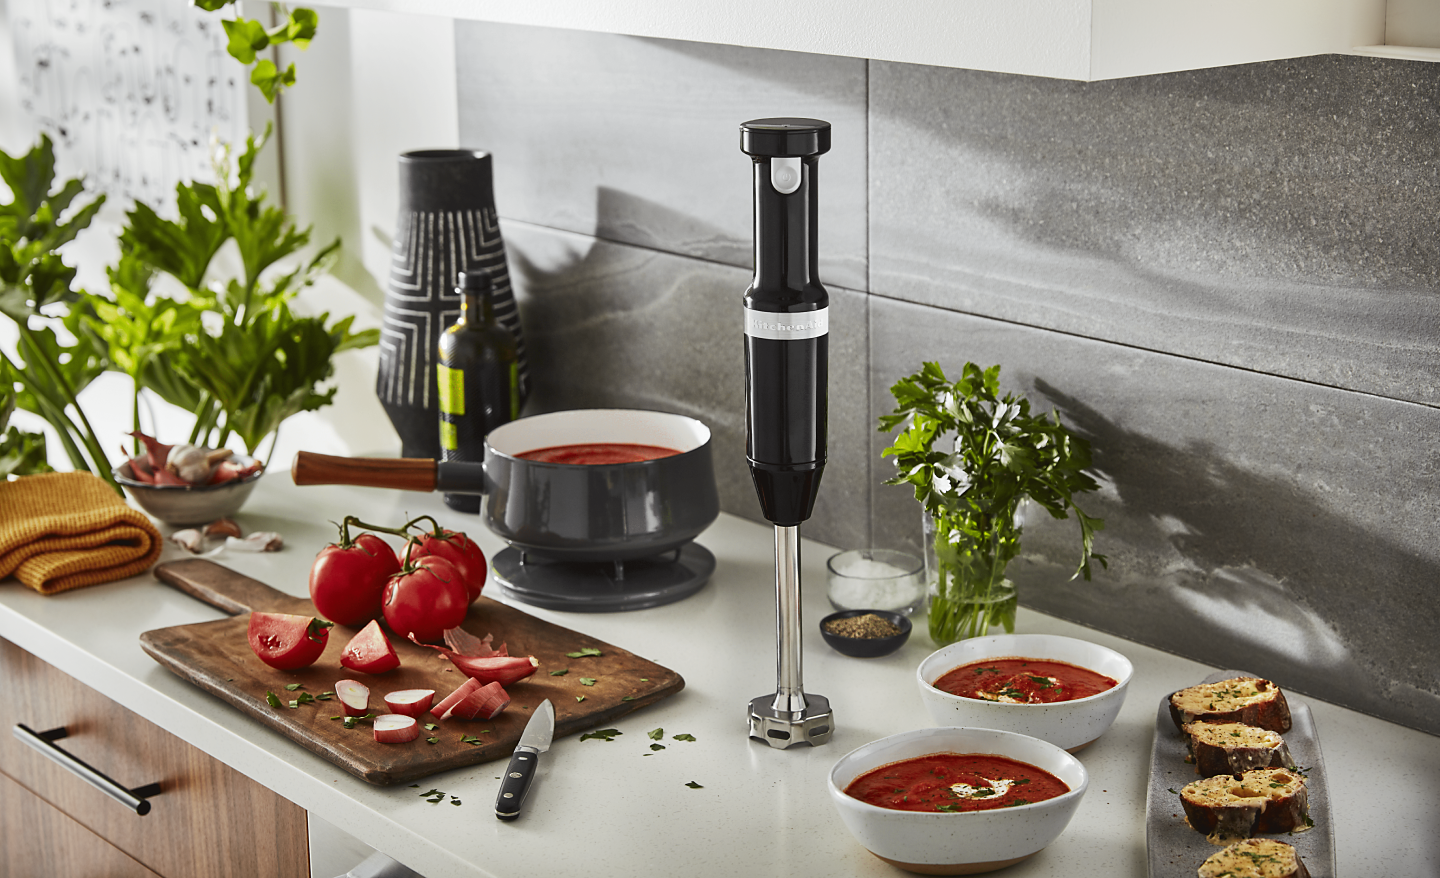 Tomato soup cooking next to an immersion blender